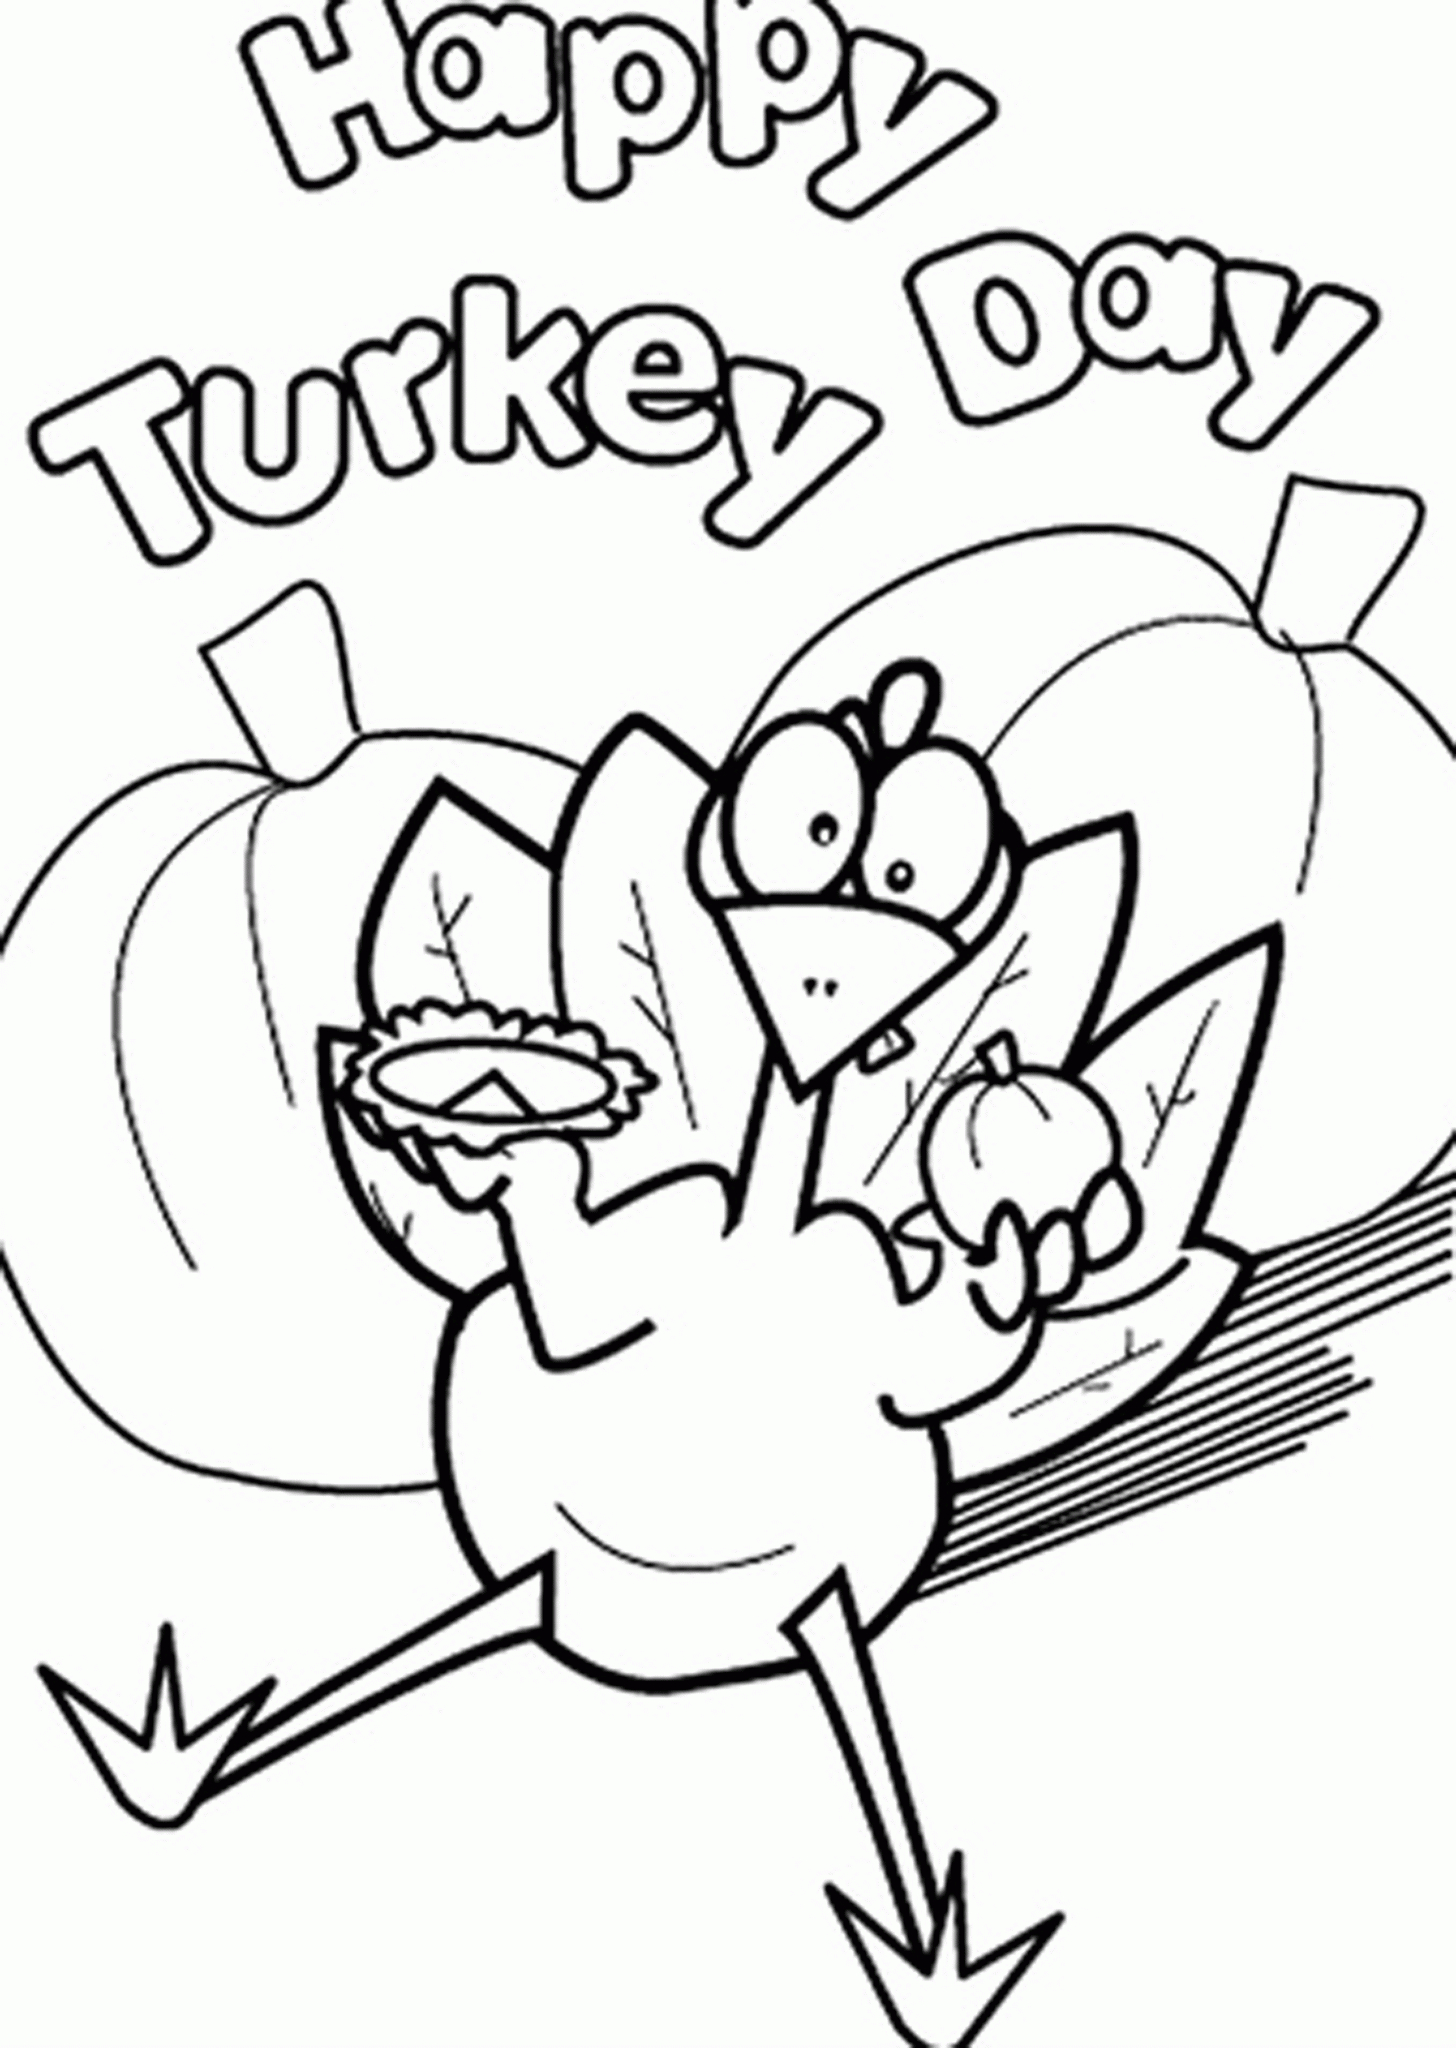 Thanksgiving Coloring Pages For Boys Download Thanksgiving Coloring Pages Kids Love Drawing And Coloring